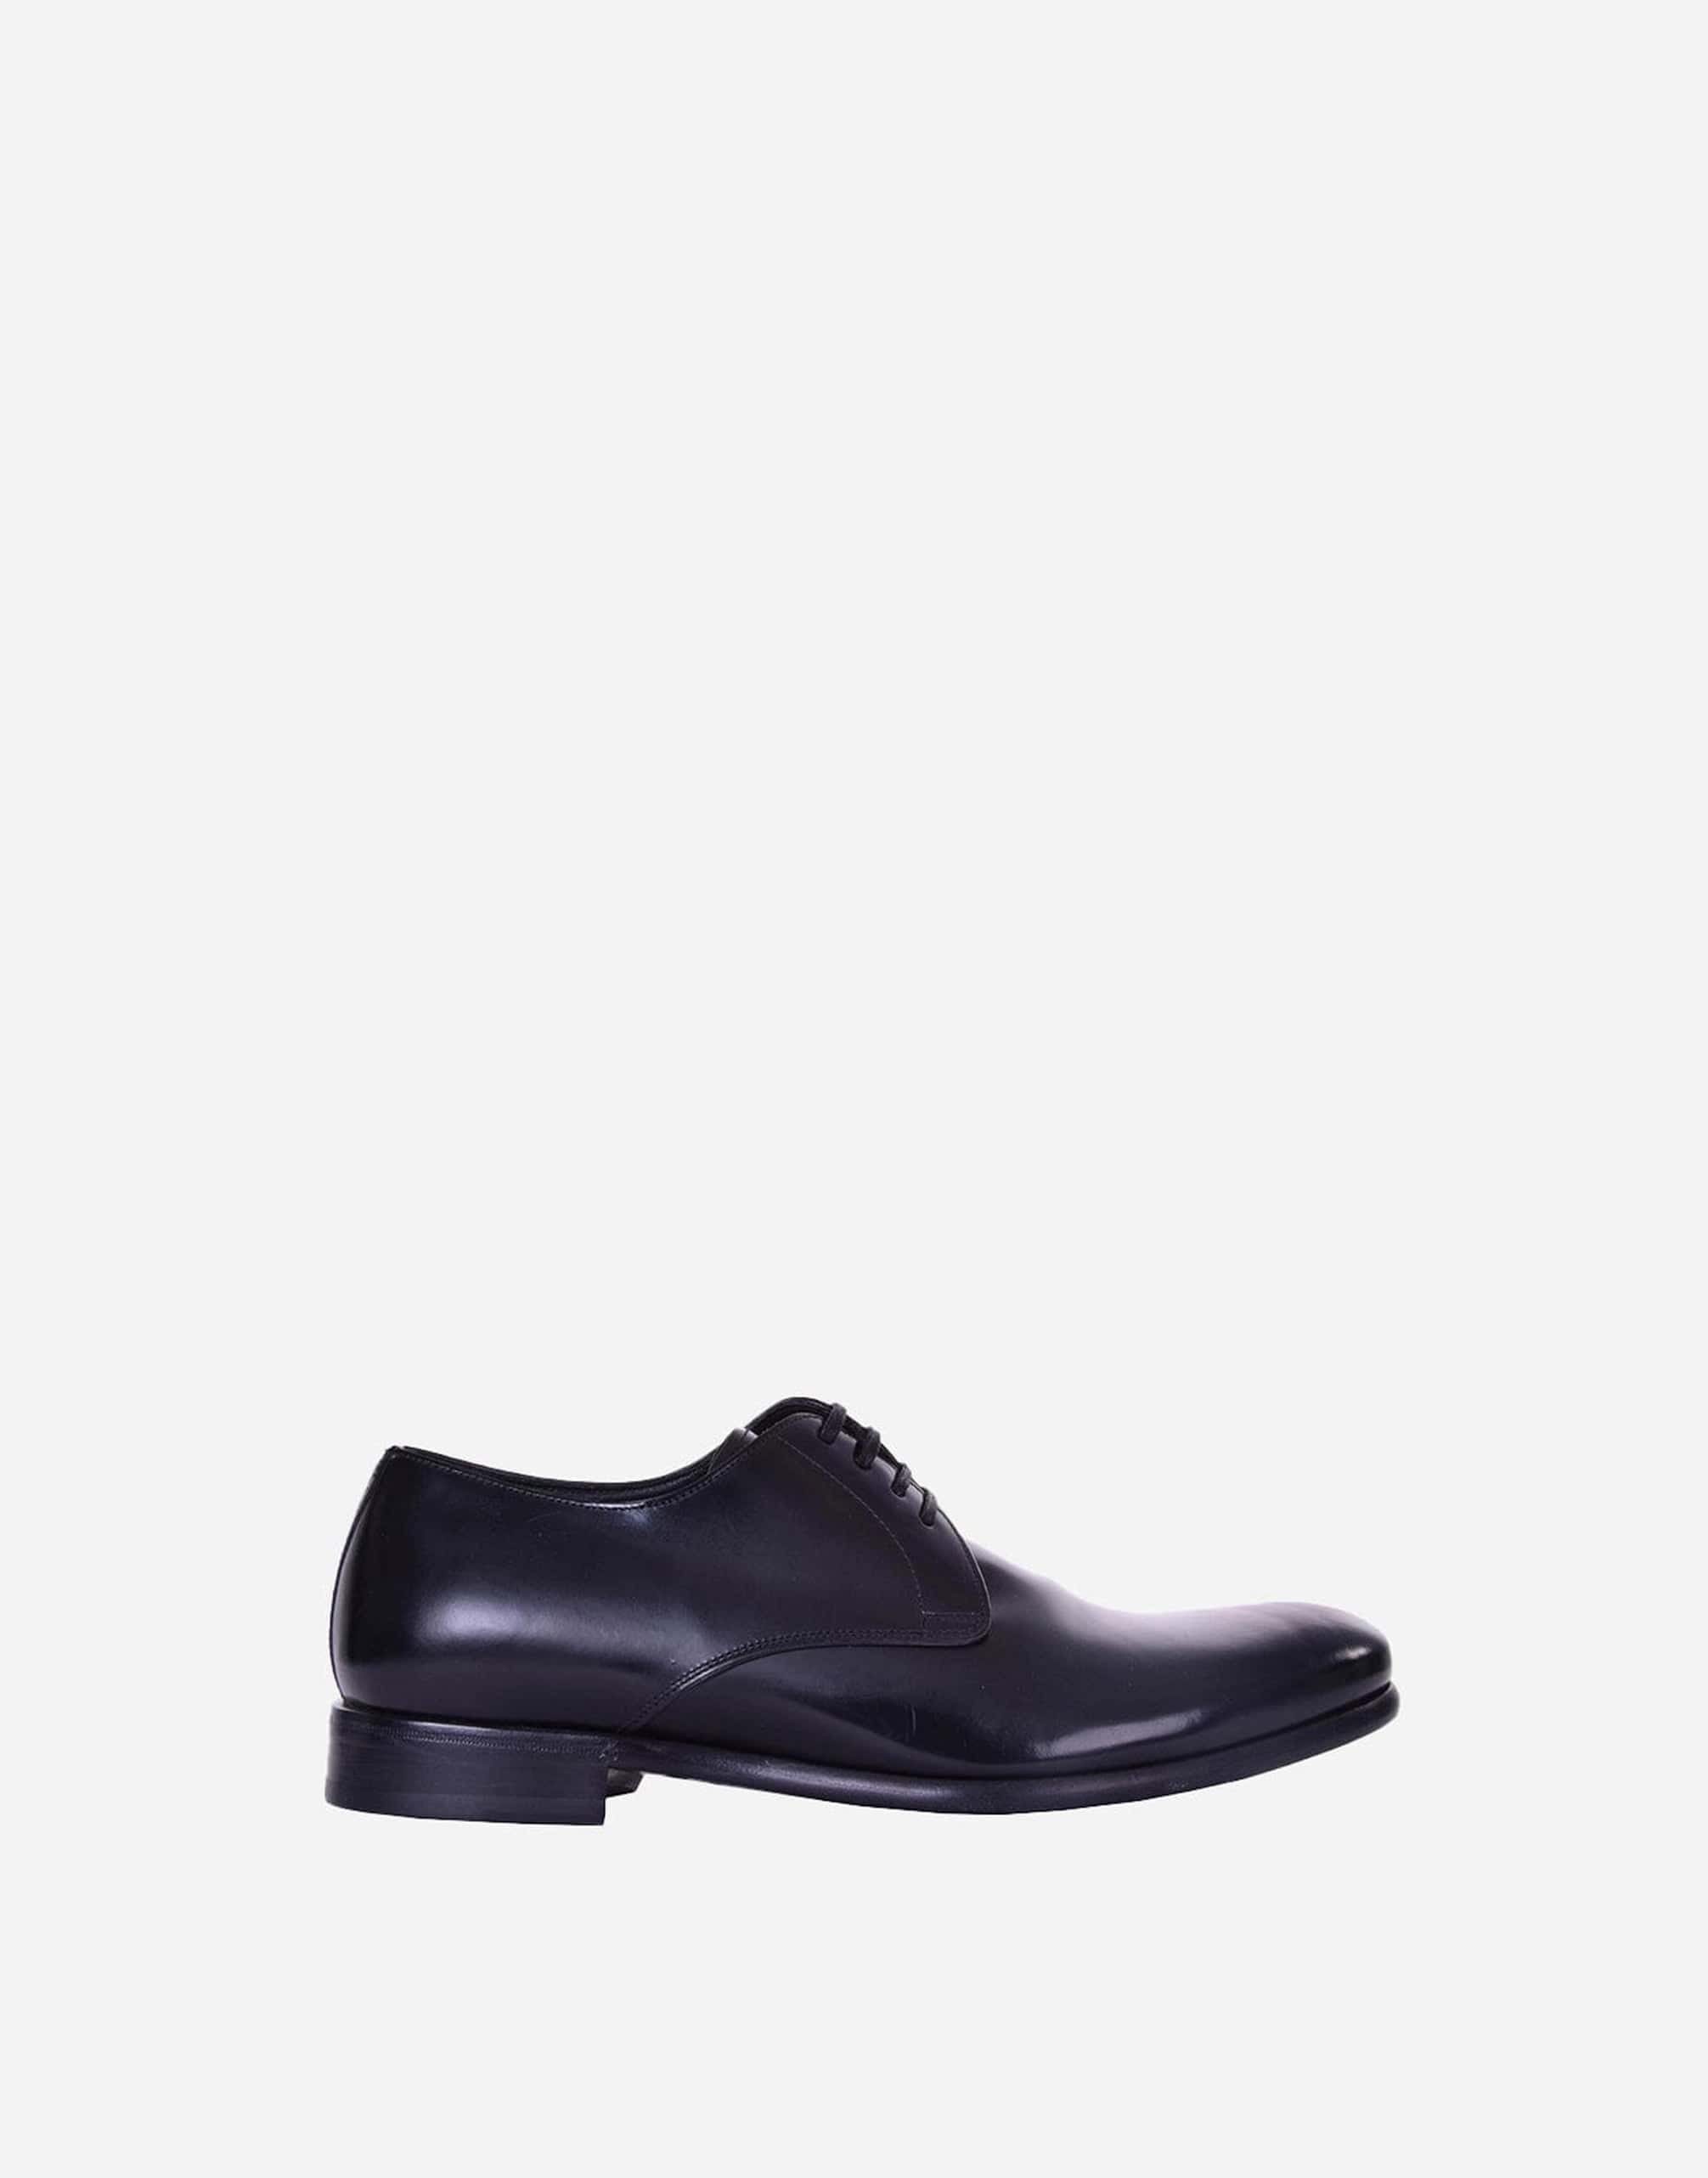 Dolce & Gabbana Formal Derby Leather Shoes